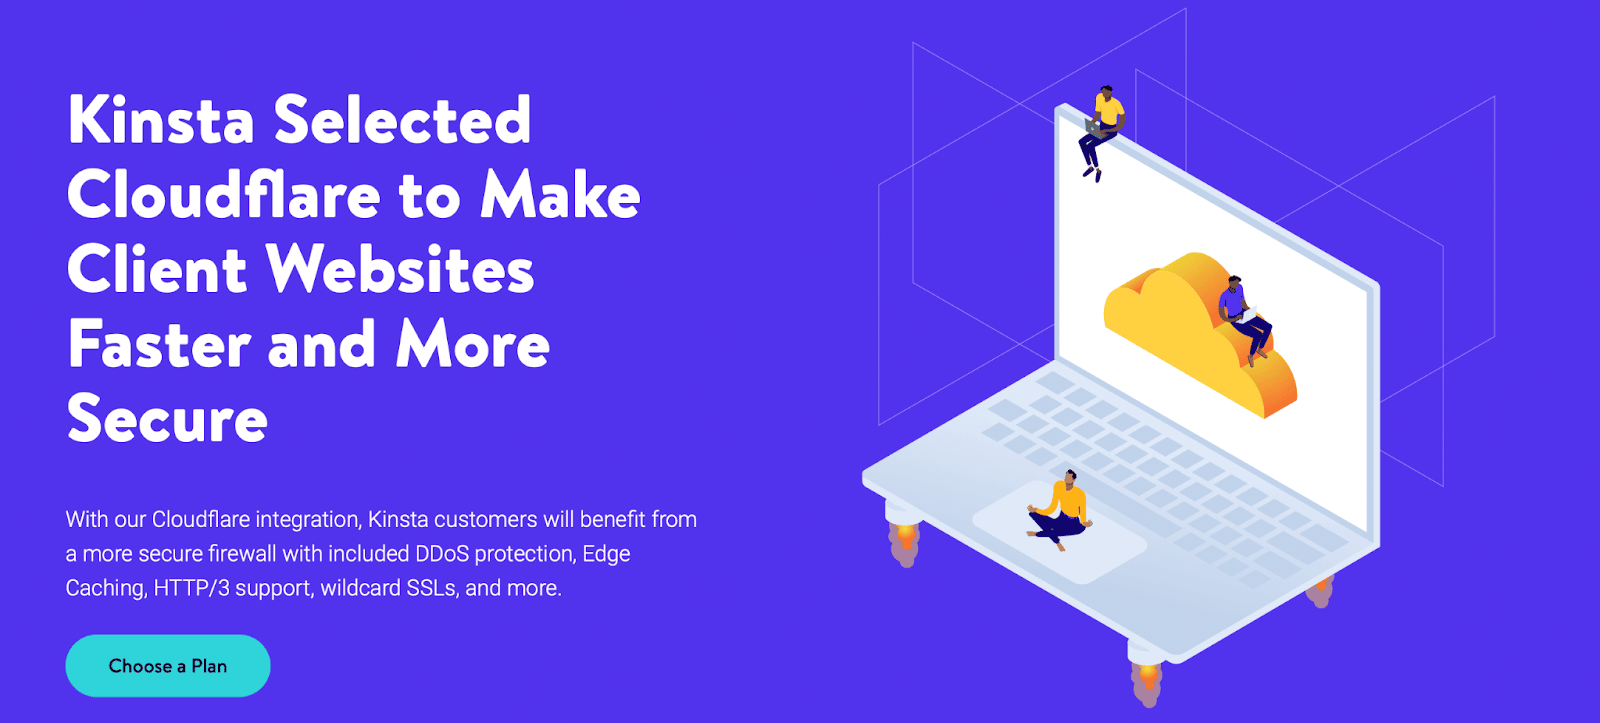 Cloudflare integration with all Kinsta hosting plans